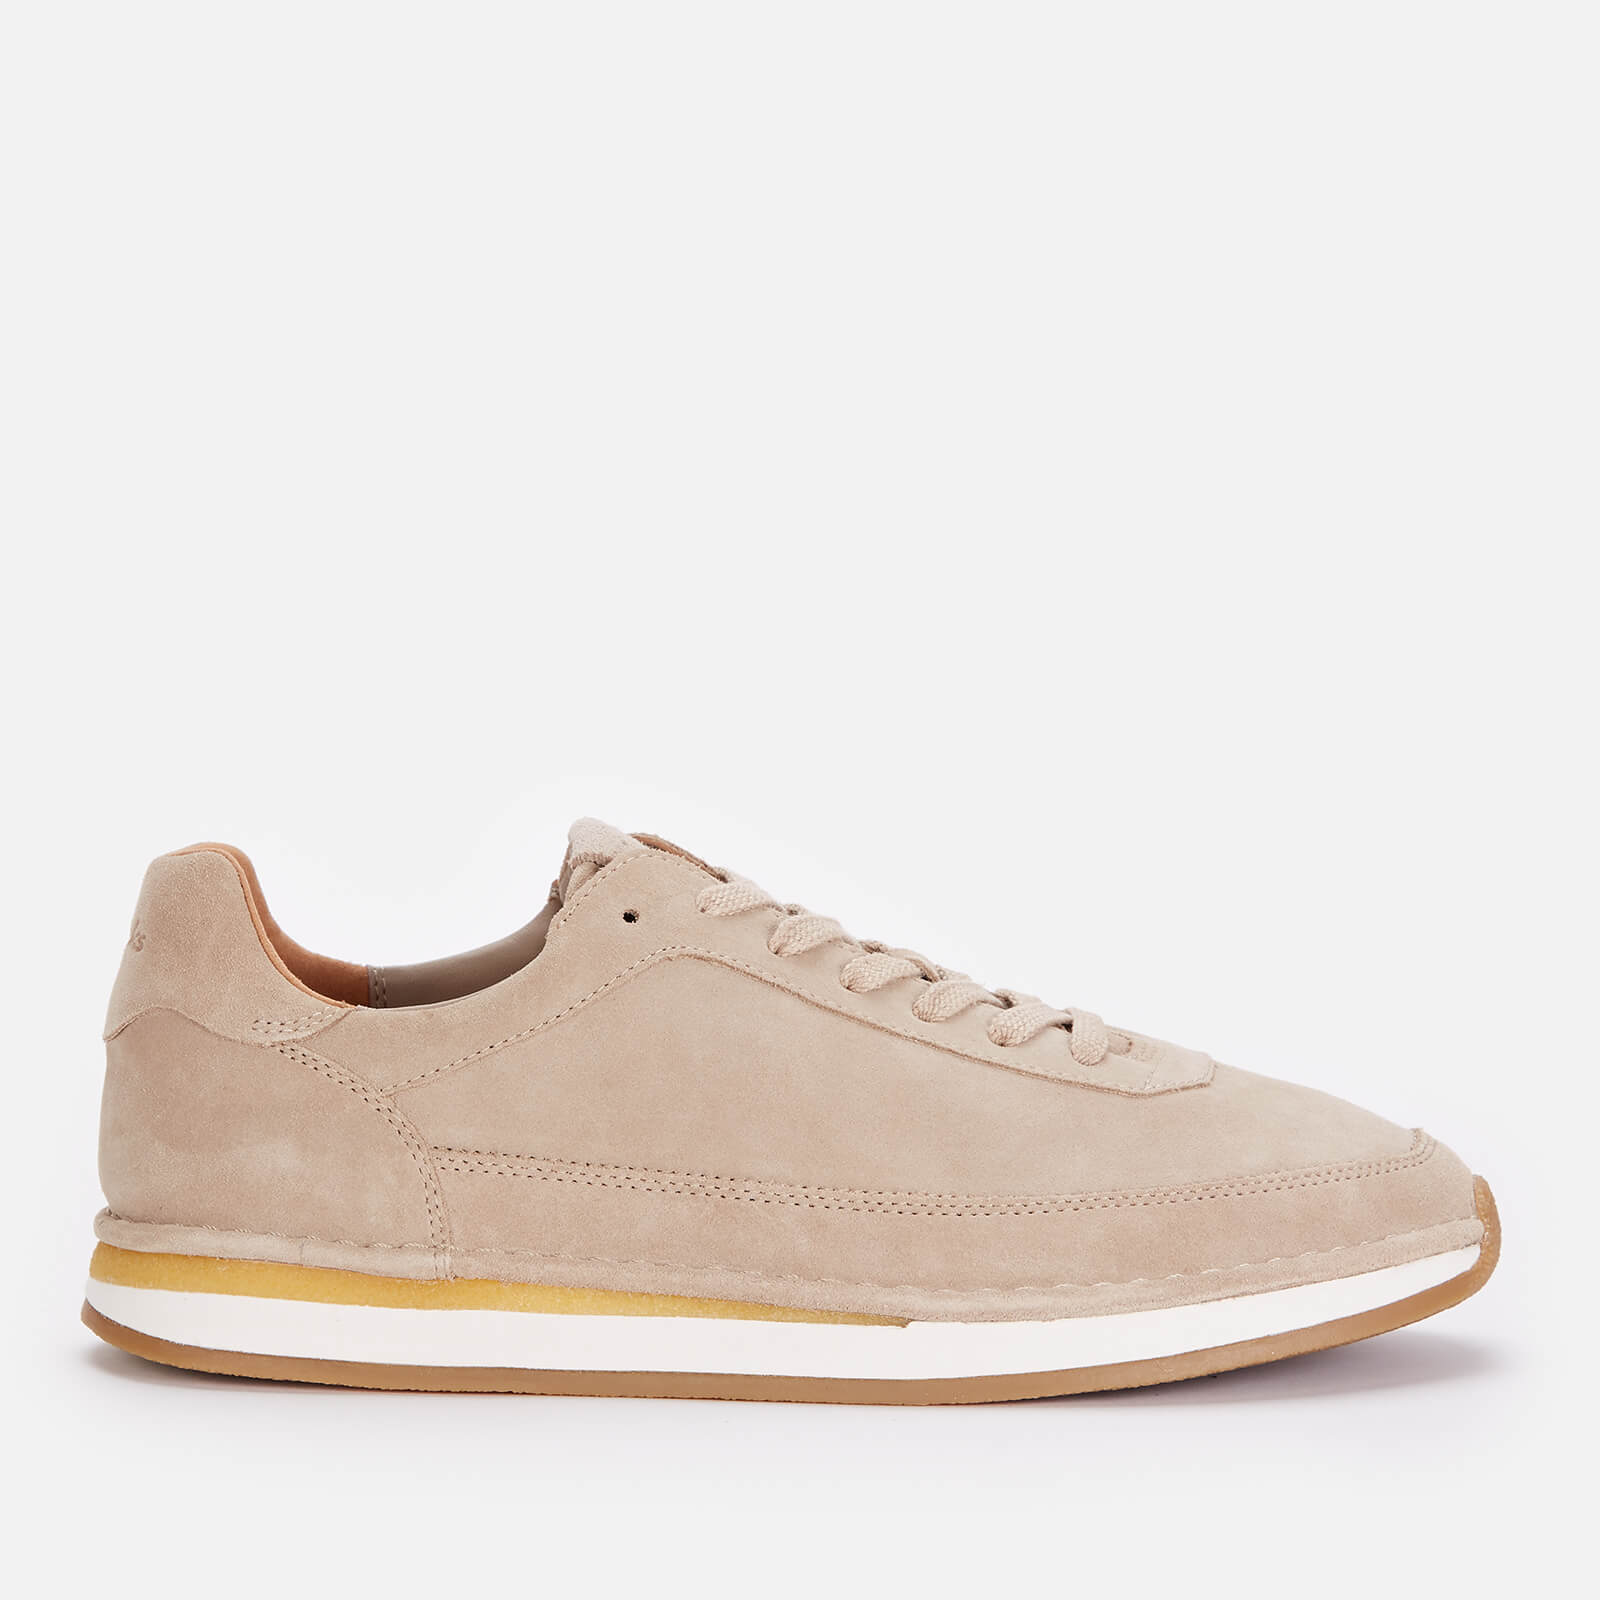 Clarks Men's Craft Run Lace Suede Trainers - Sand - UK 7